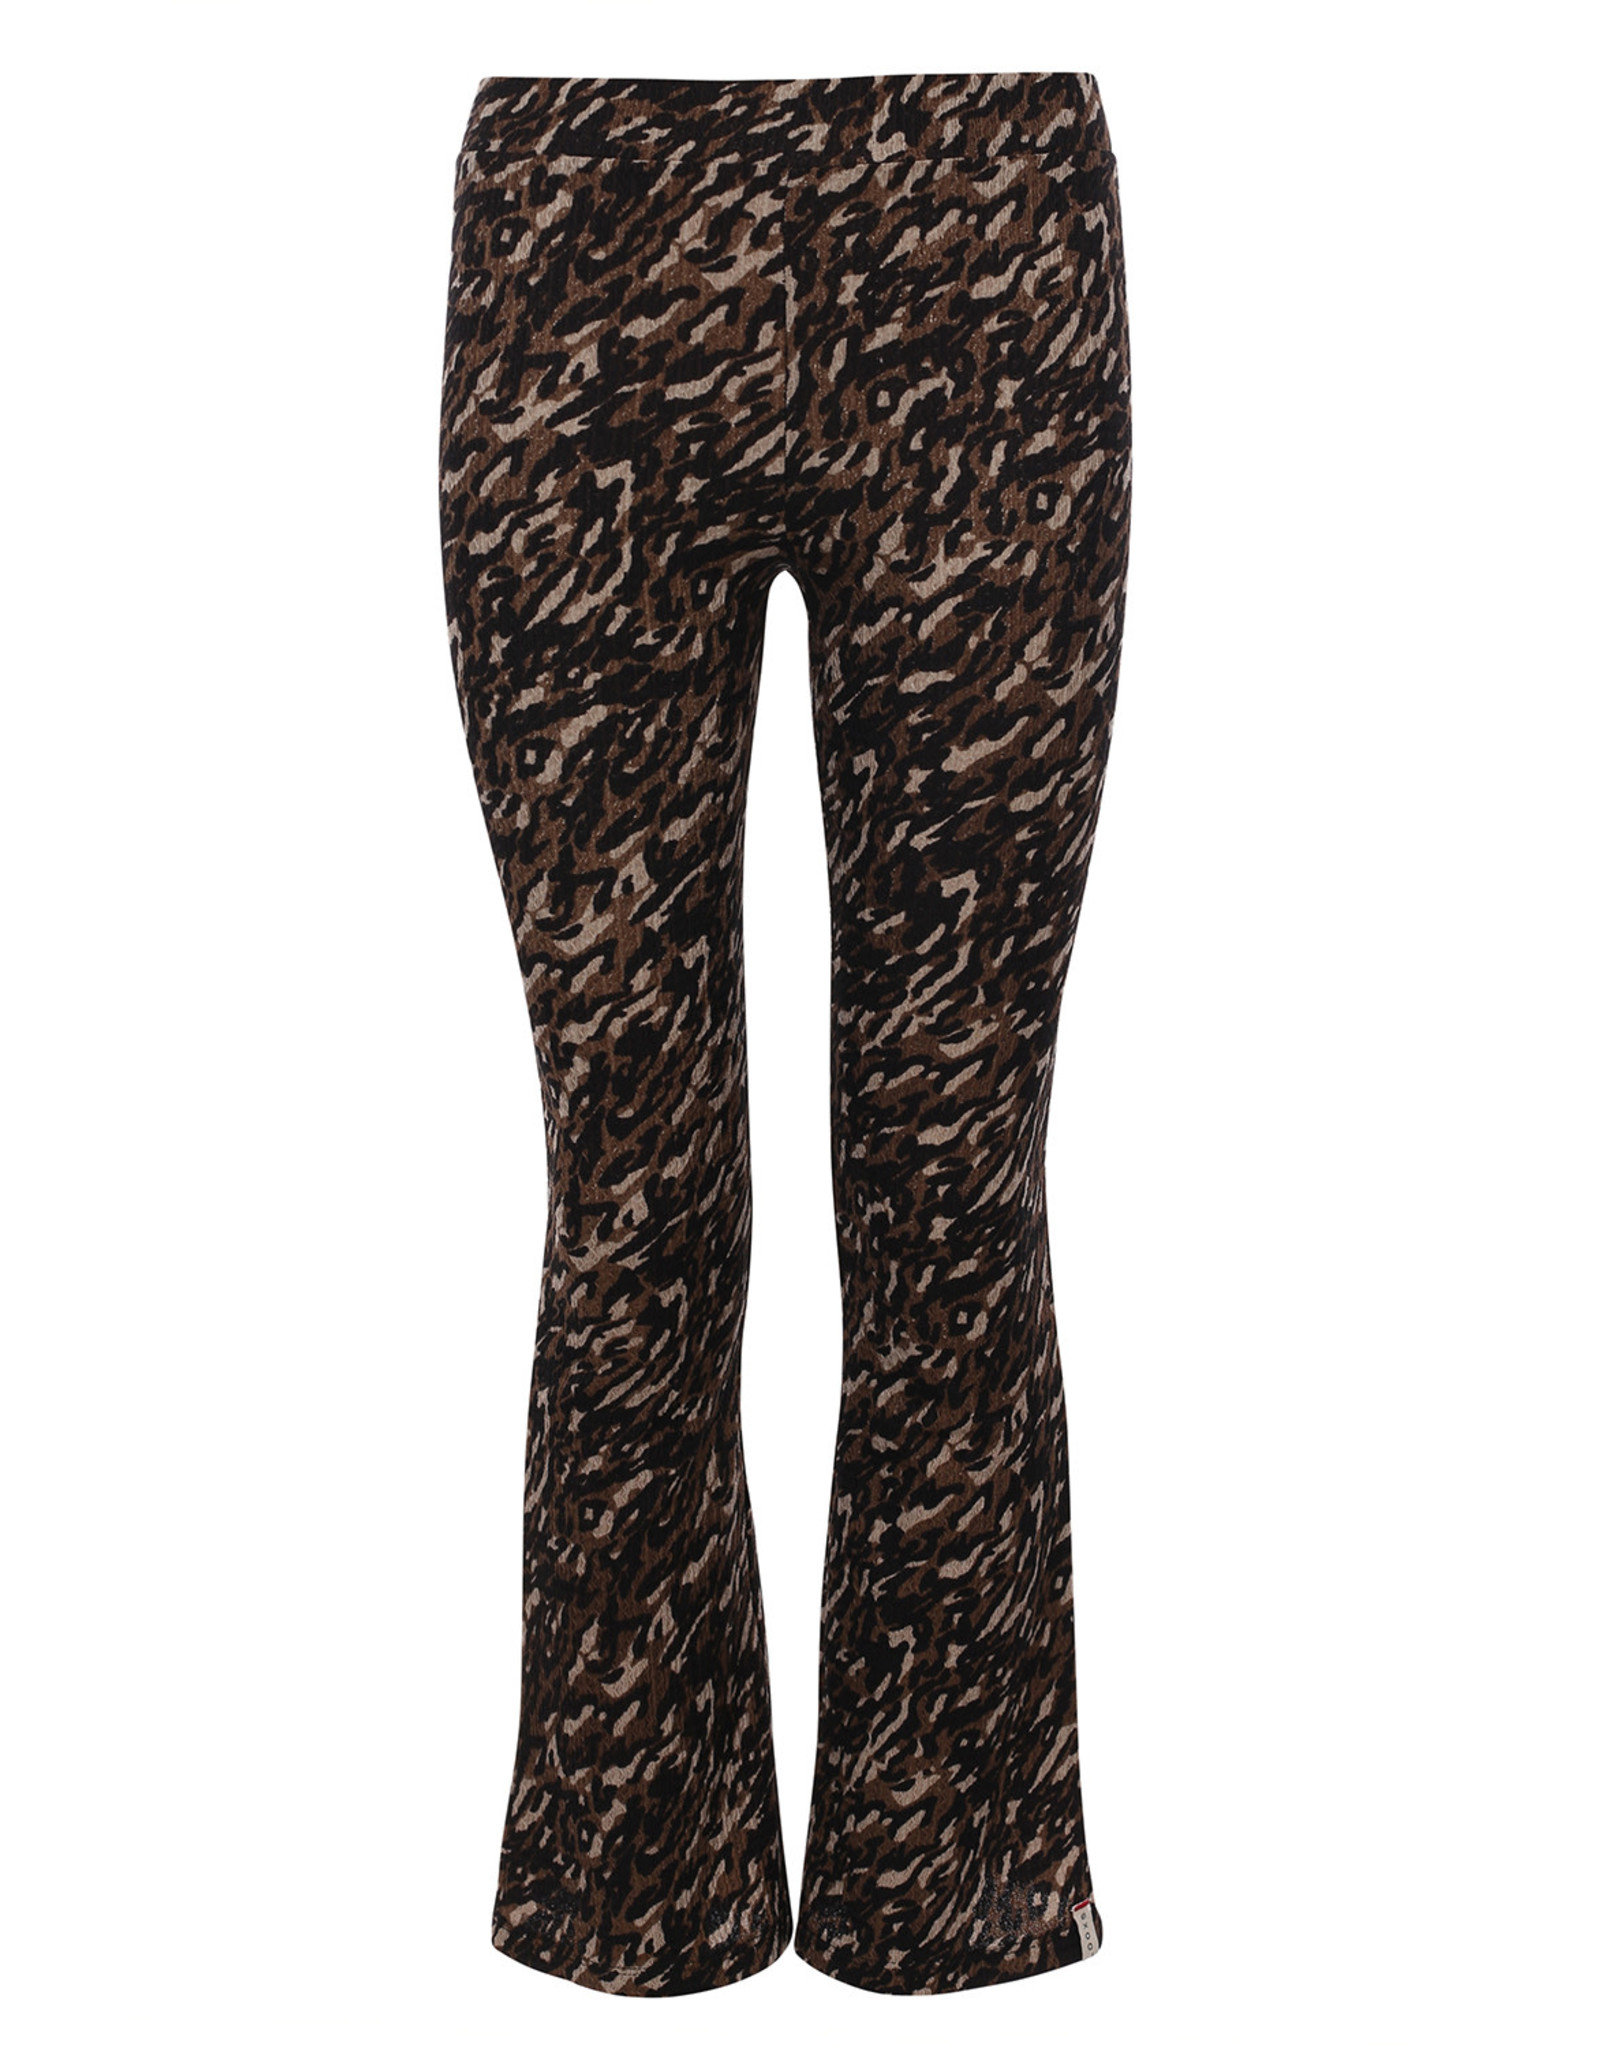 Looxs 10Sixteen crincle flared pants camouflage